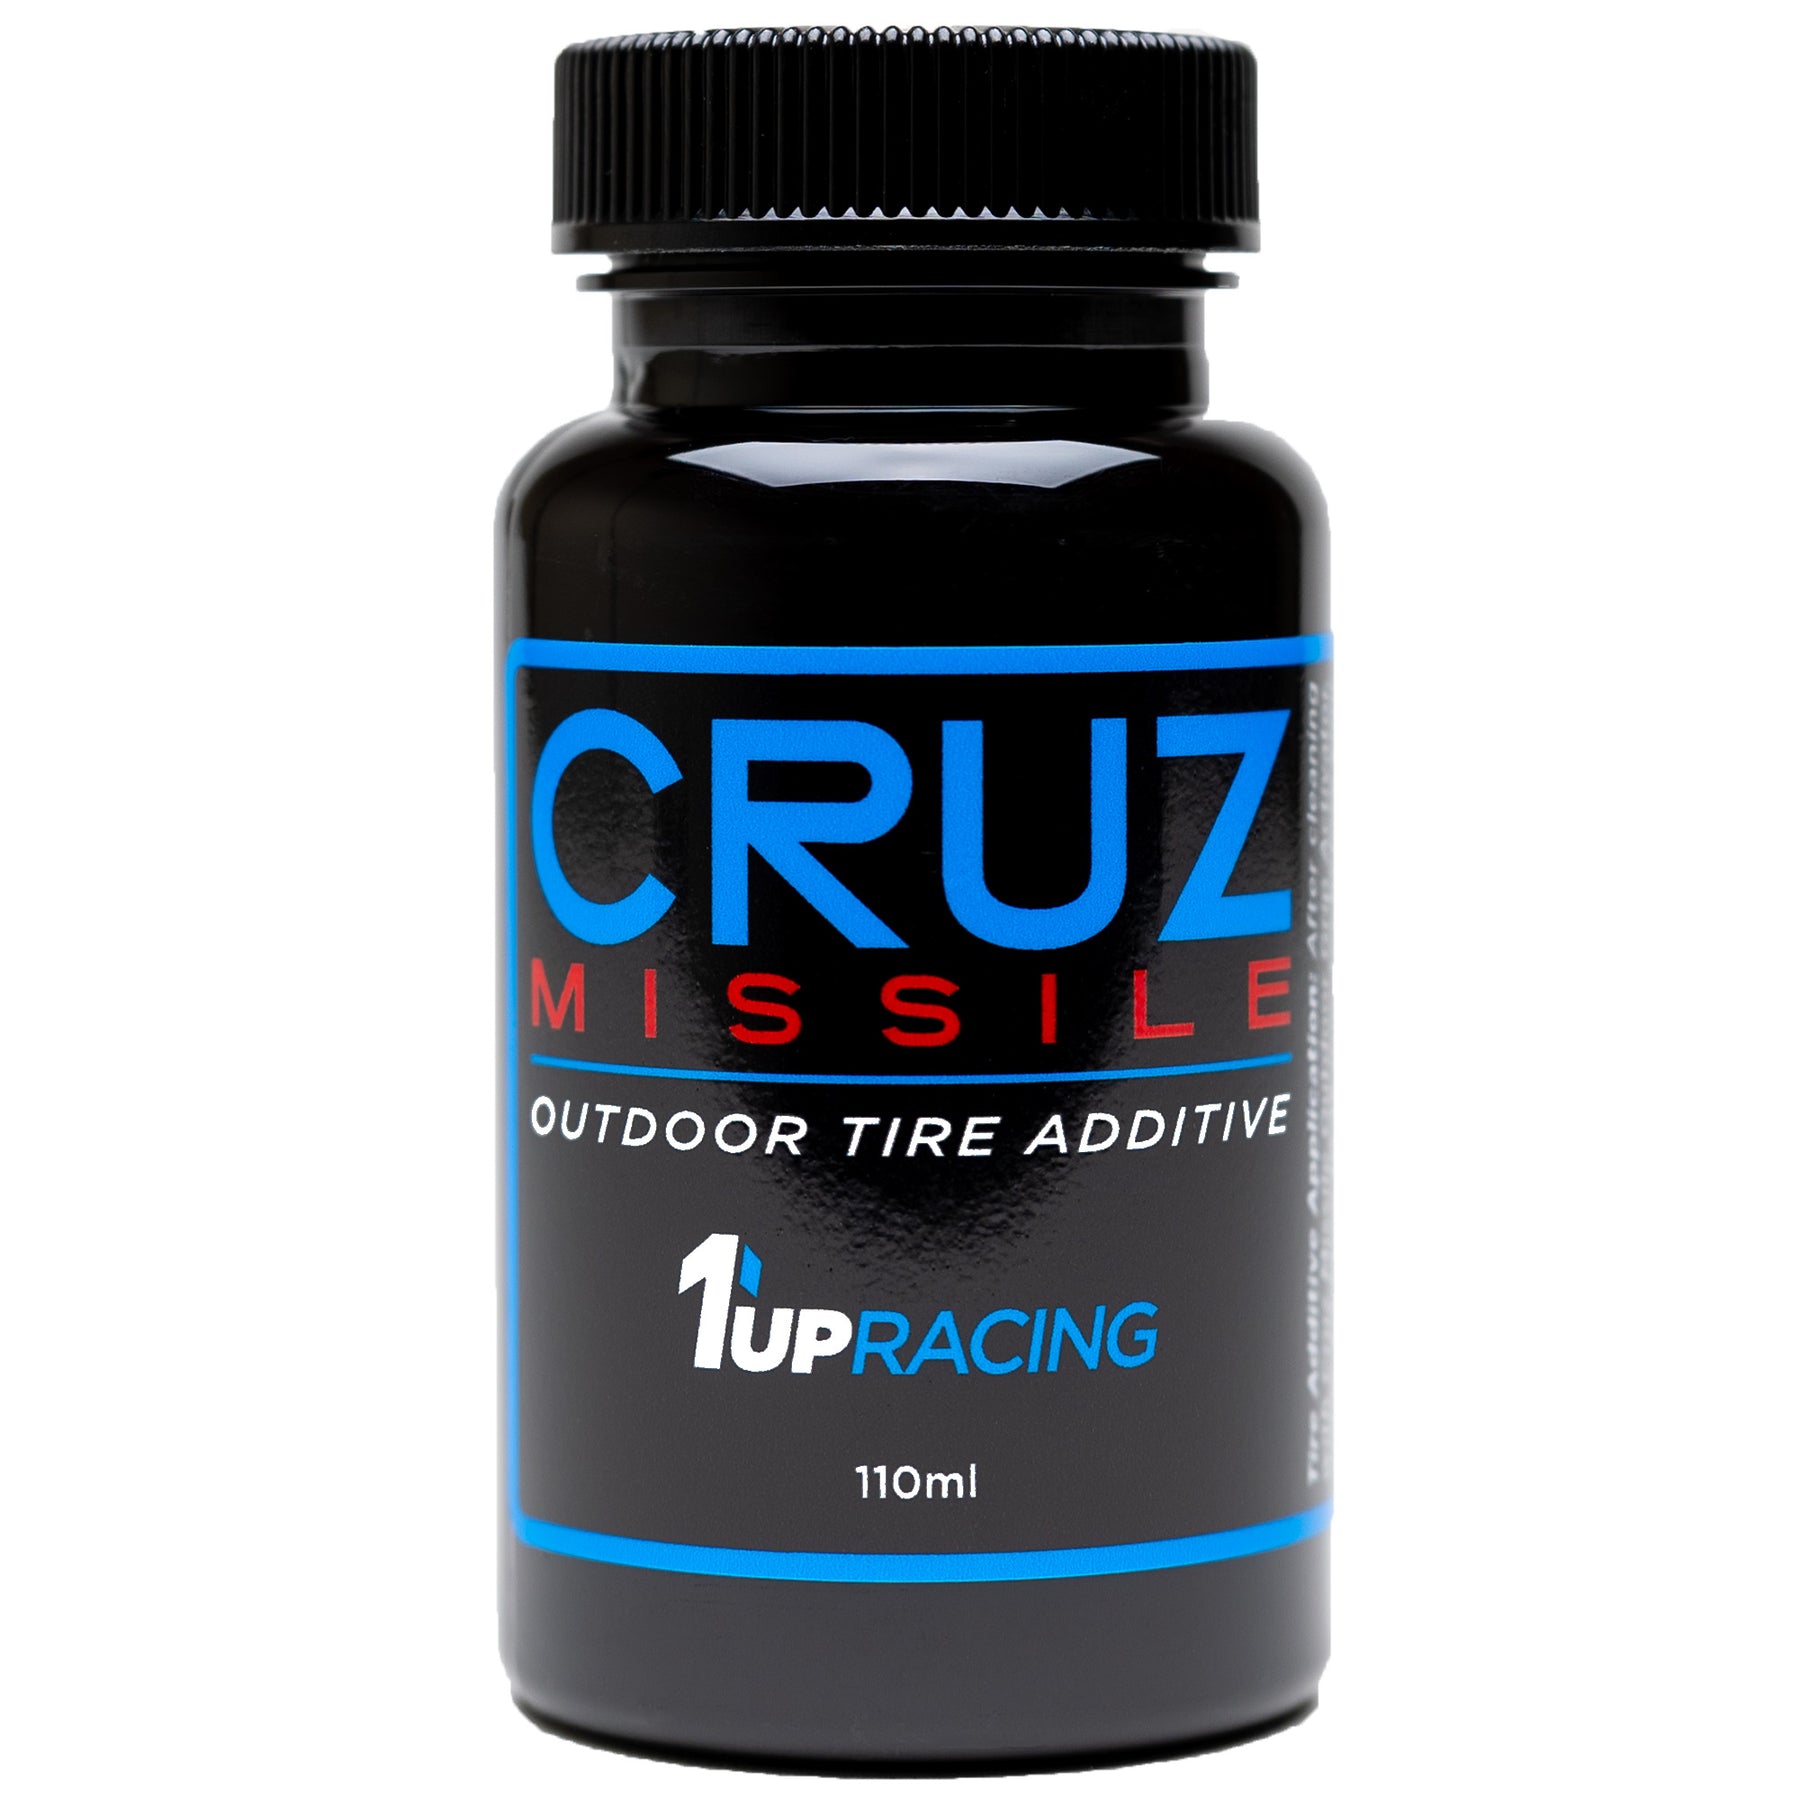 1up Racing Cruz Missile Outdoor Tire Additive